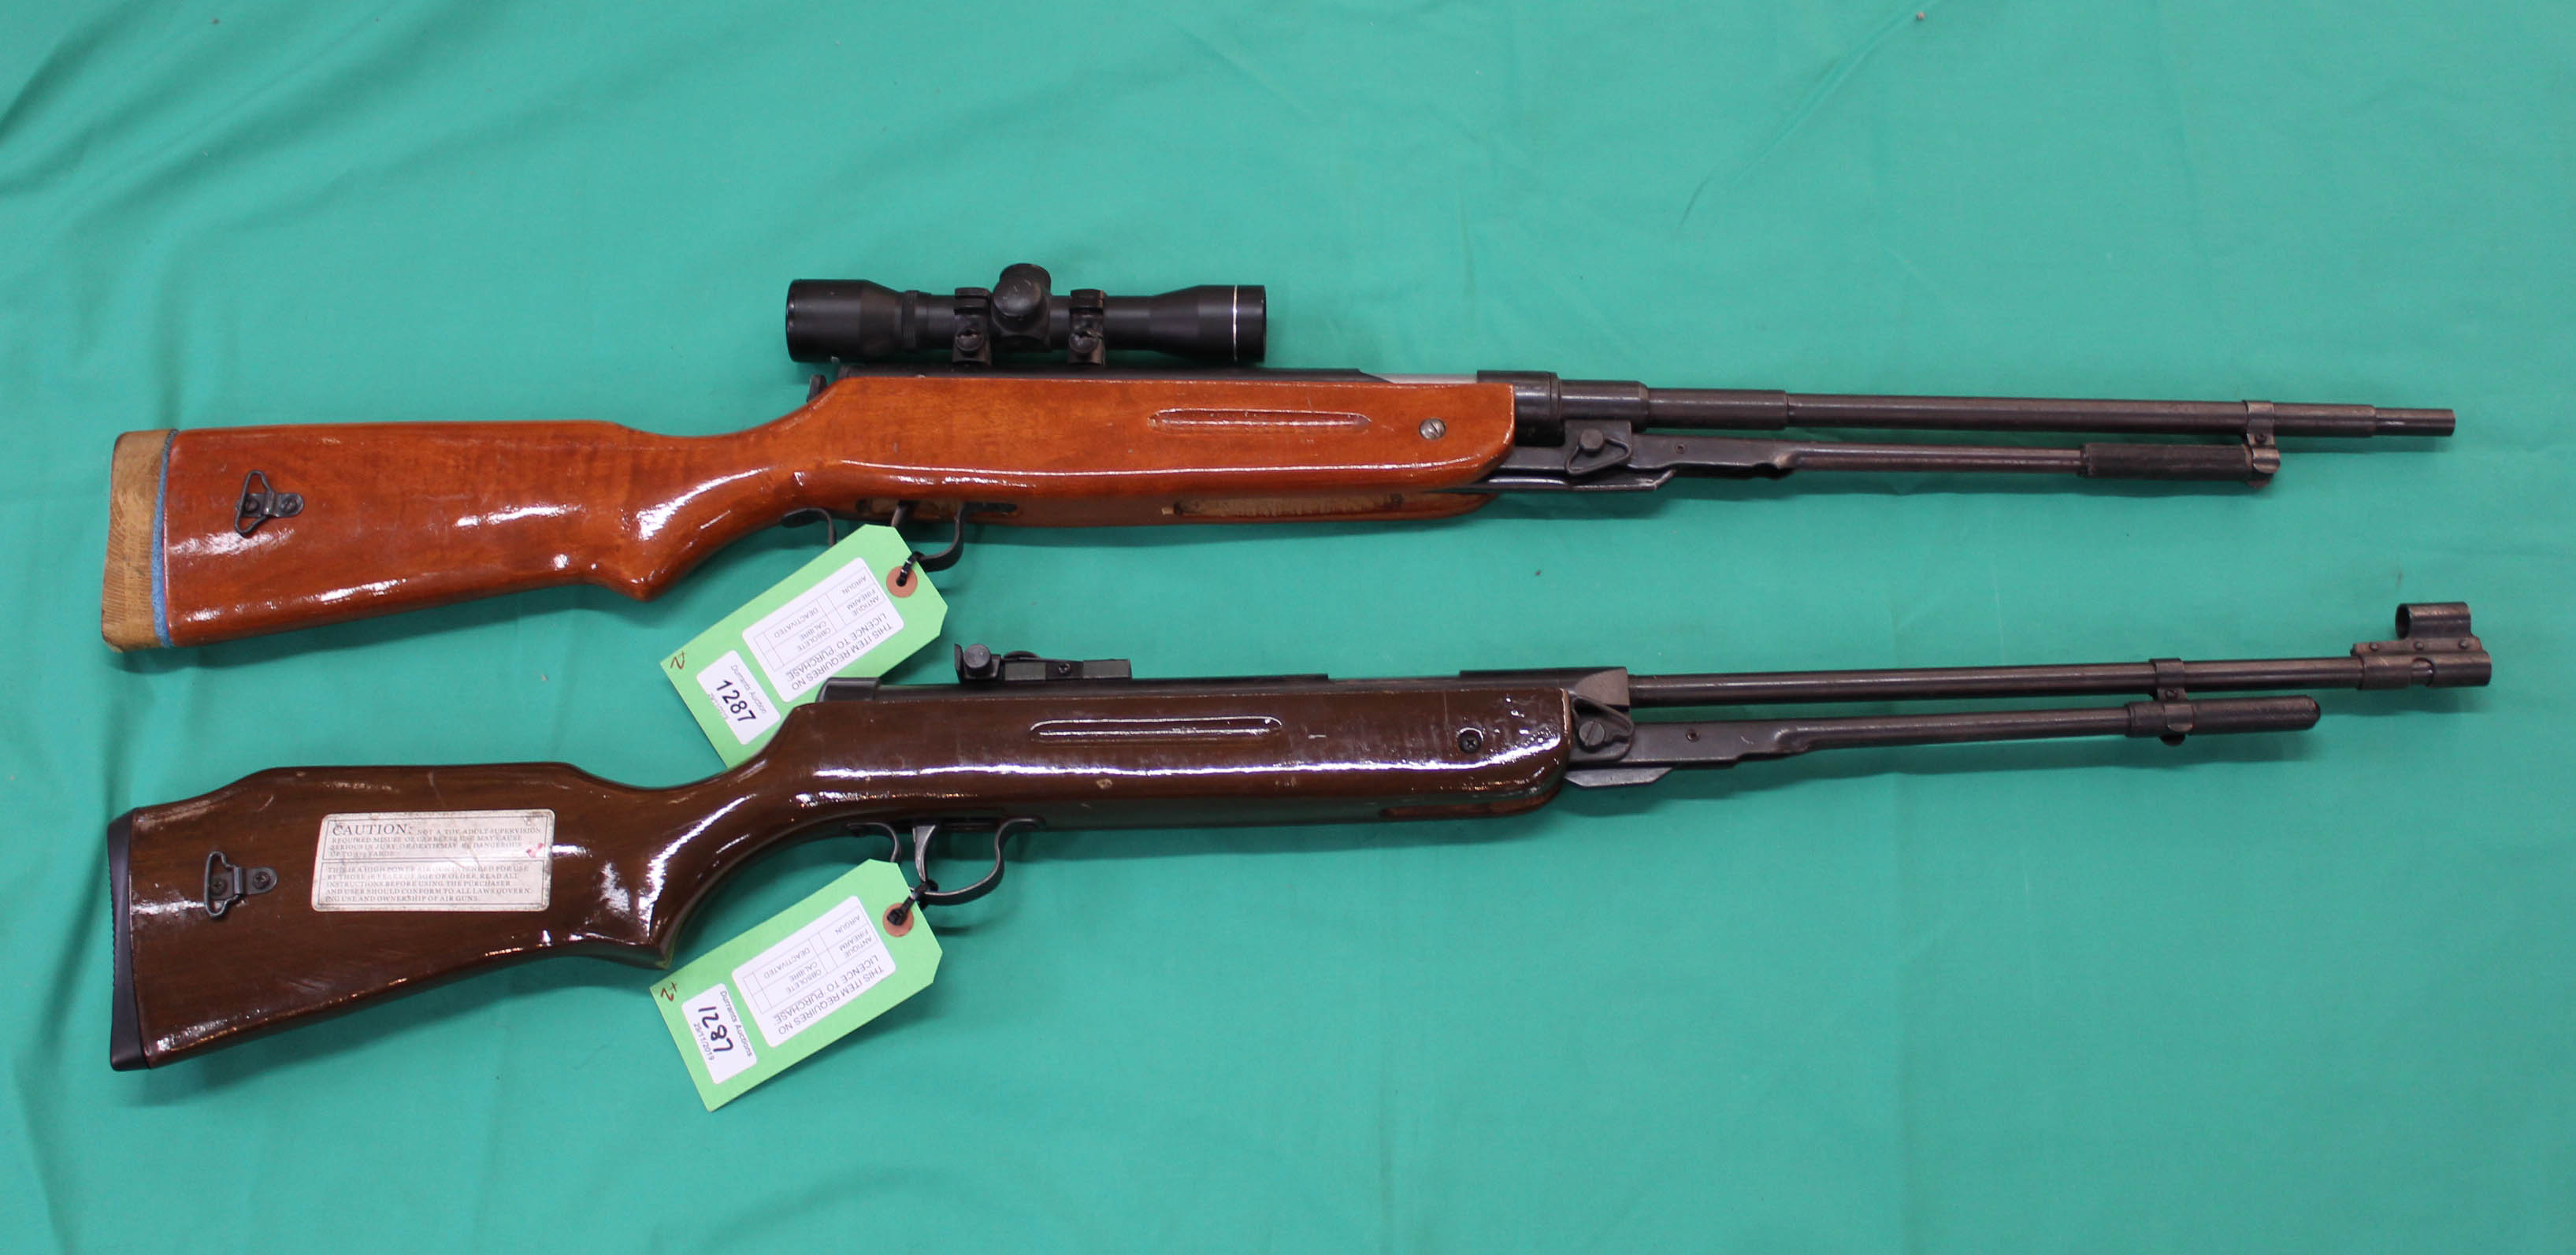 Two Chinese air rifles, one with a scope,